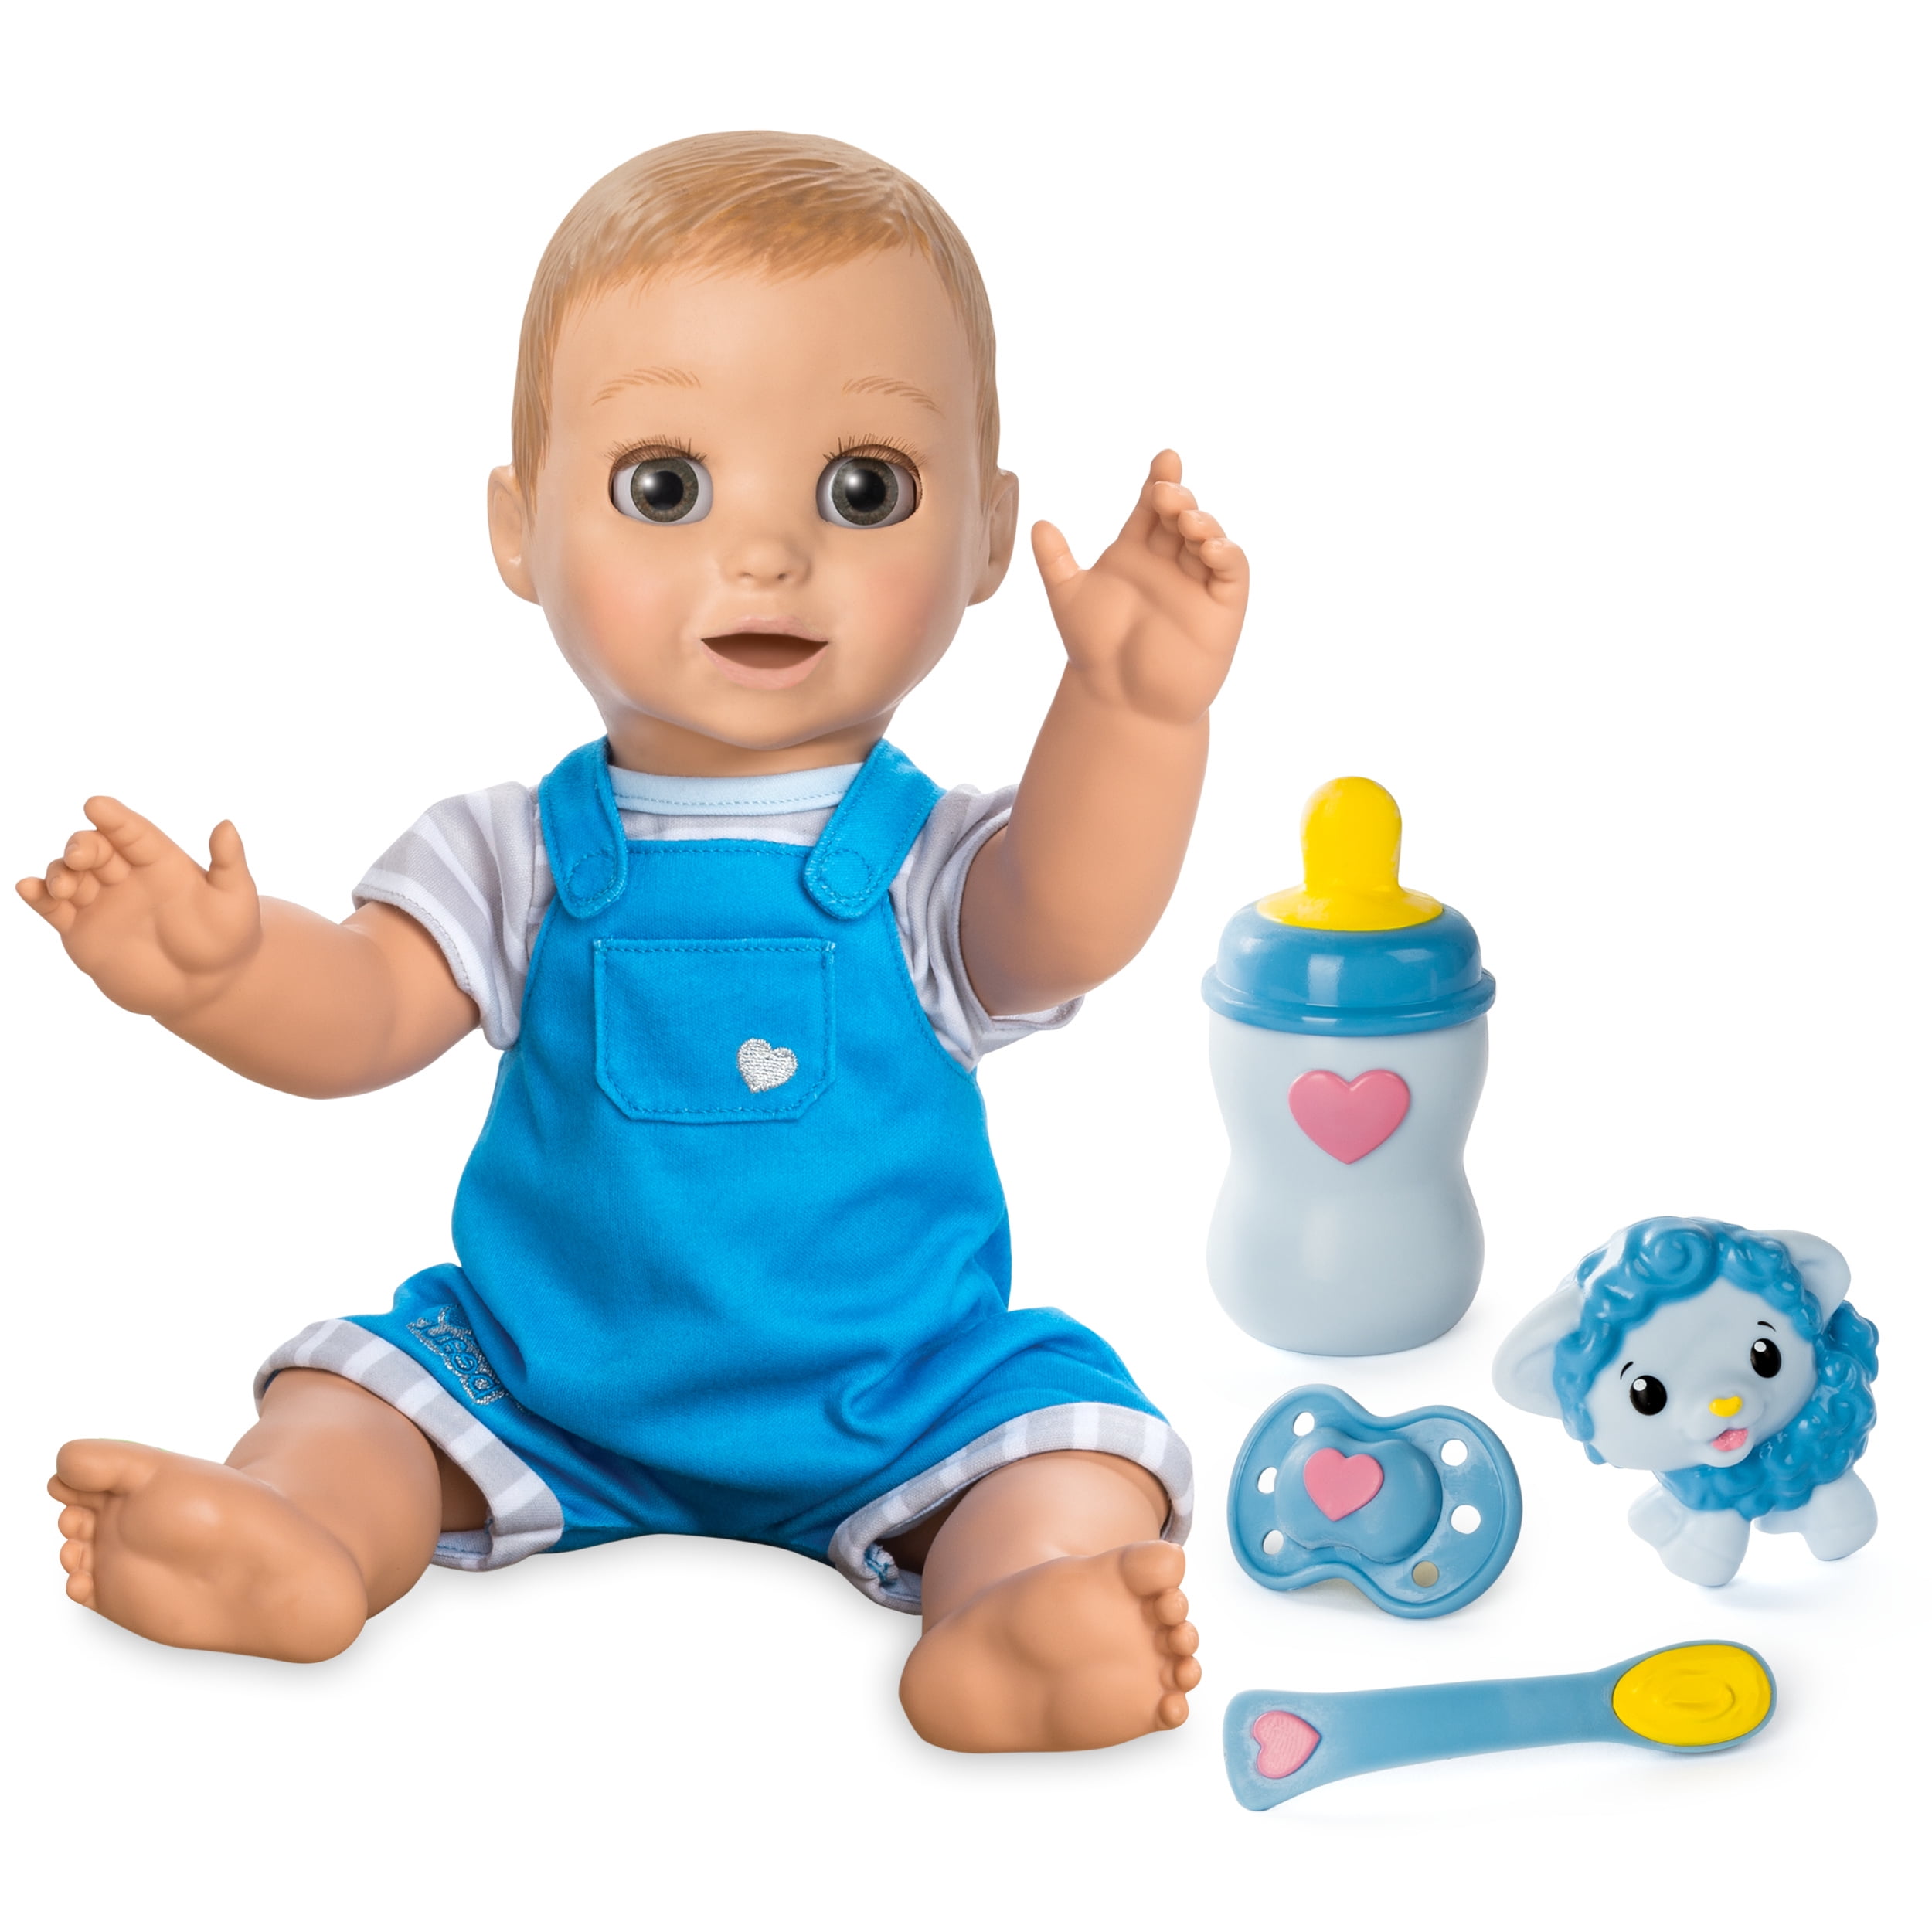 Luvabeau - Responsive Baby Doll with 